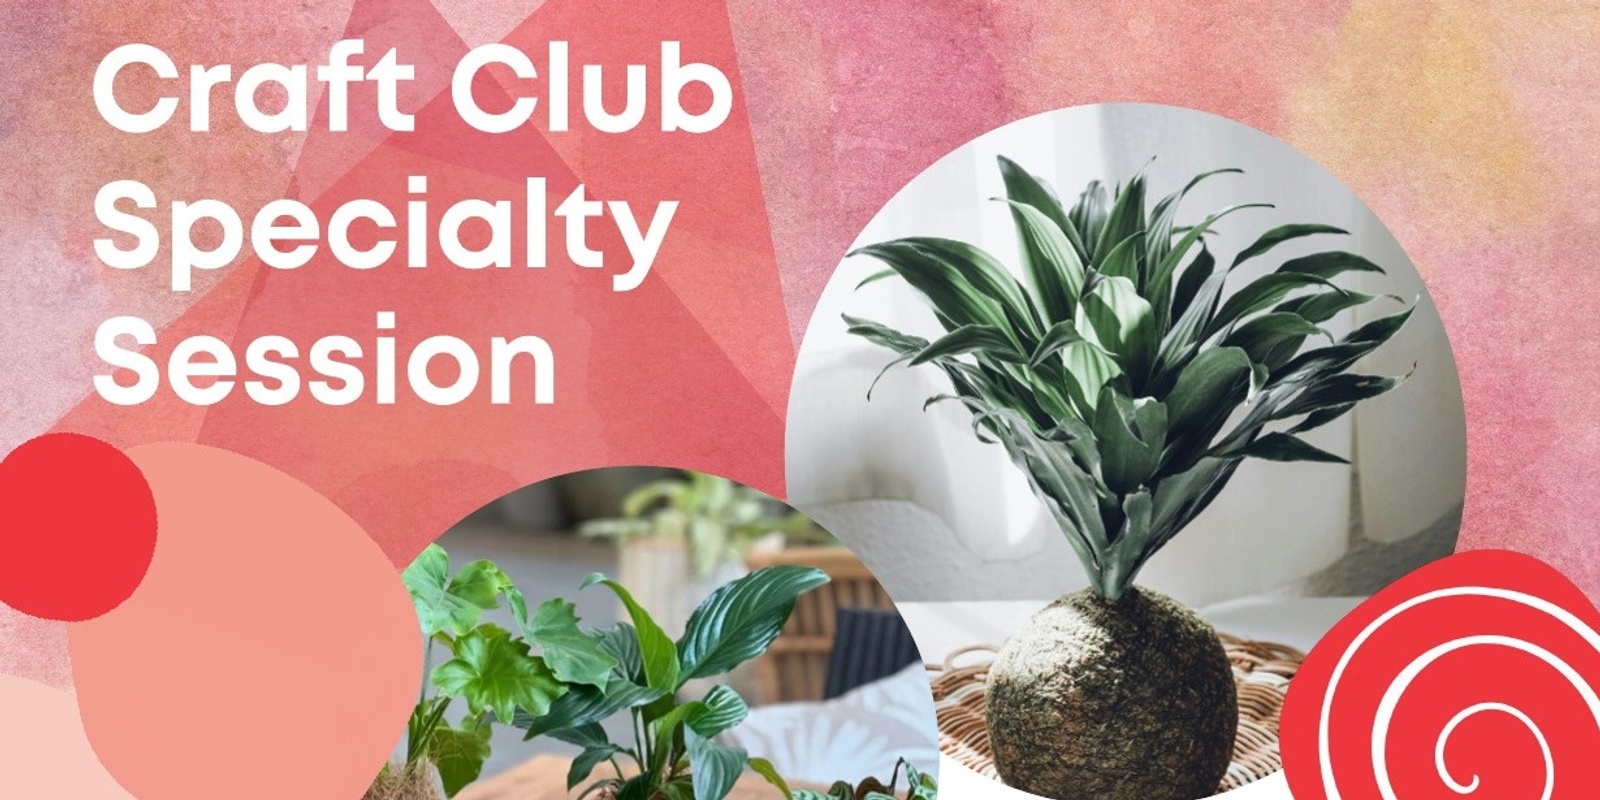 Banner image for YMCA Craft Club Specialty Session  - Kokedama